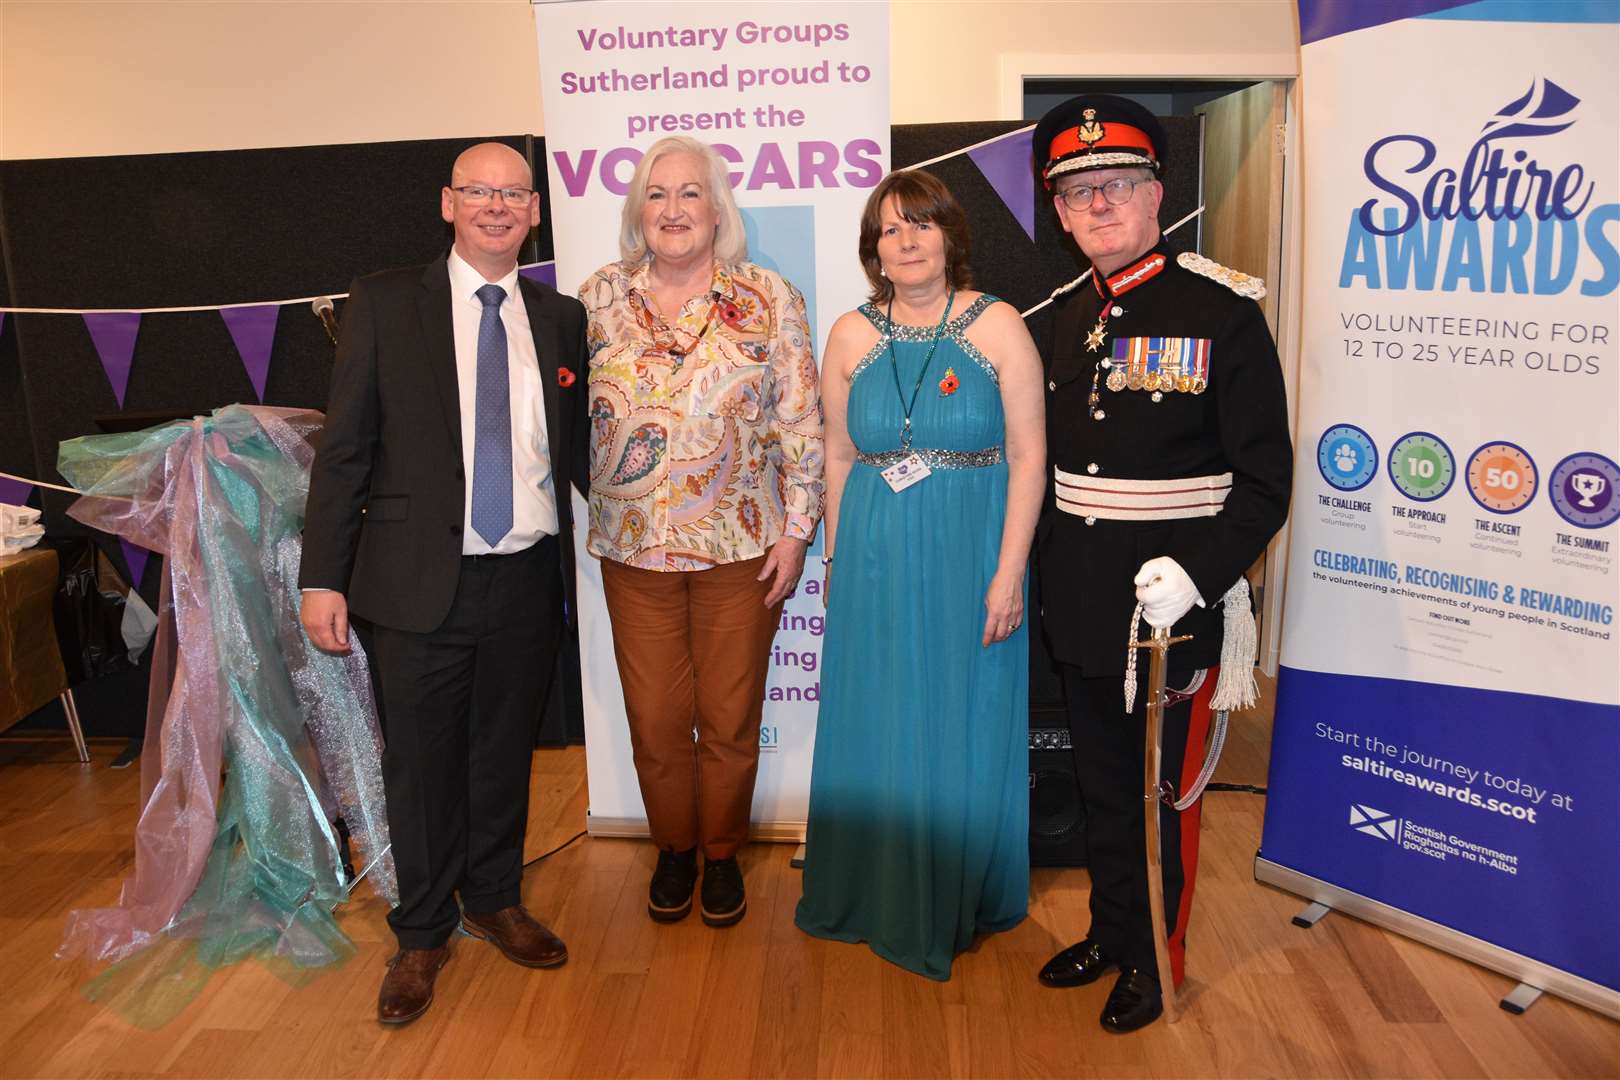 Christine Ross, VGS chief officer (third left) with, from left, David Shearer, SSE Renewables community fund manager; Frances Gunn, VGS chairperson; and Major General Patrick Marriott.